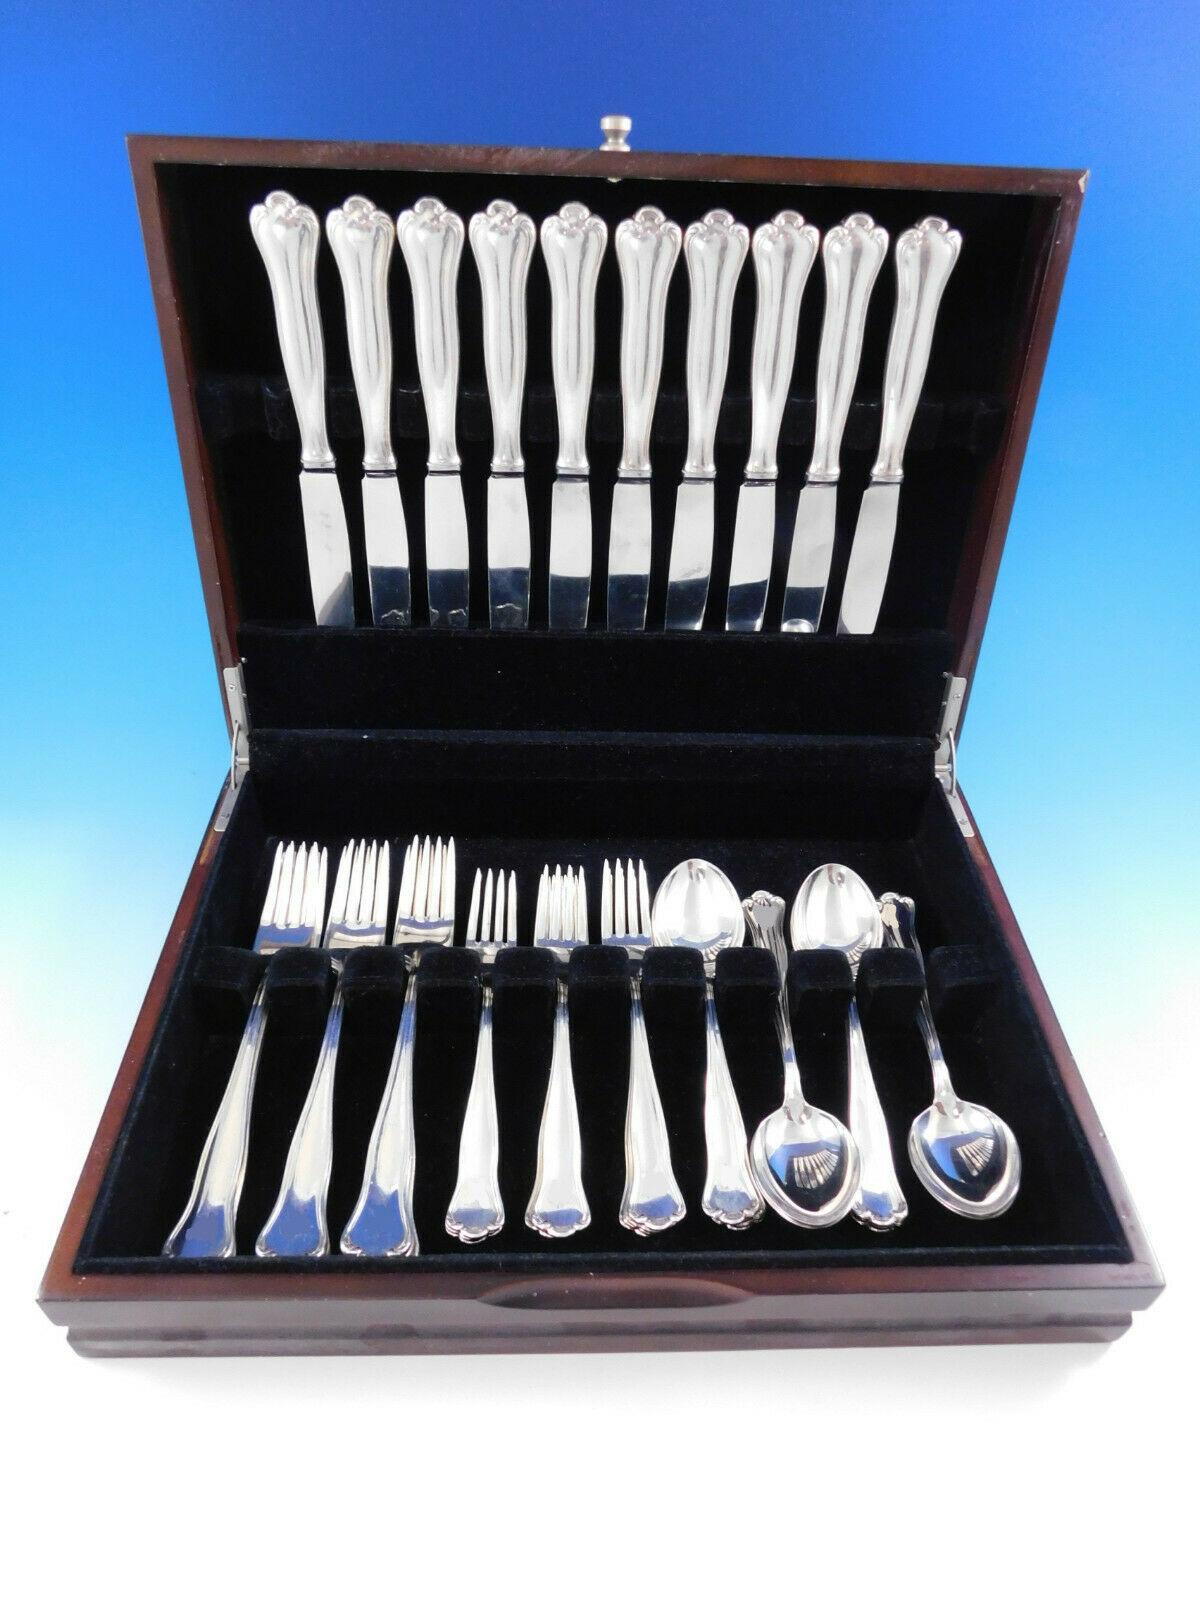 C.G. Hallberg .830 silver Swedish dinner size flatware set - 40 pieces. This set includes:

10 dinner size knives, 9 3/4